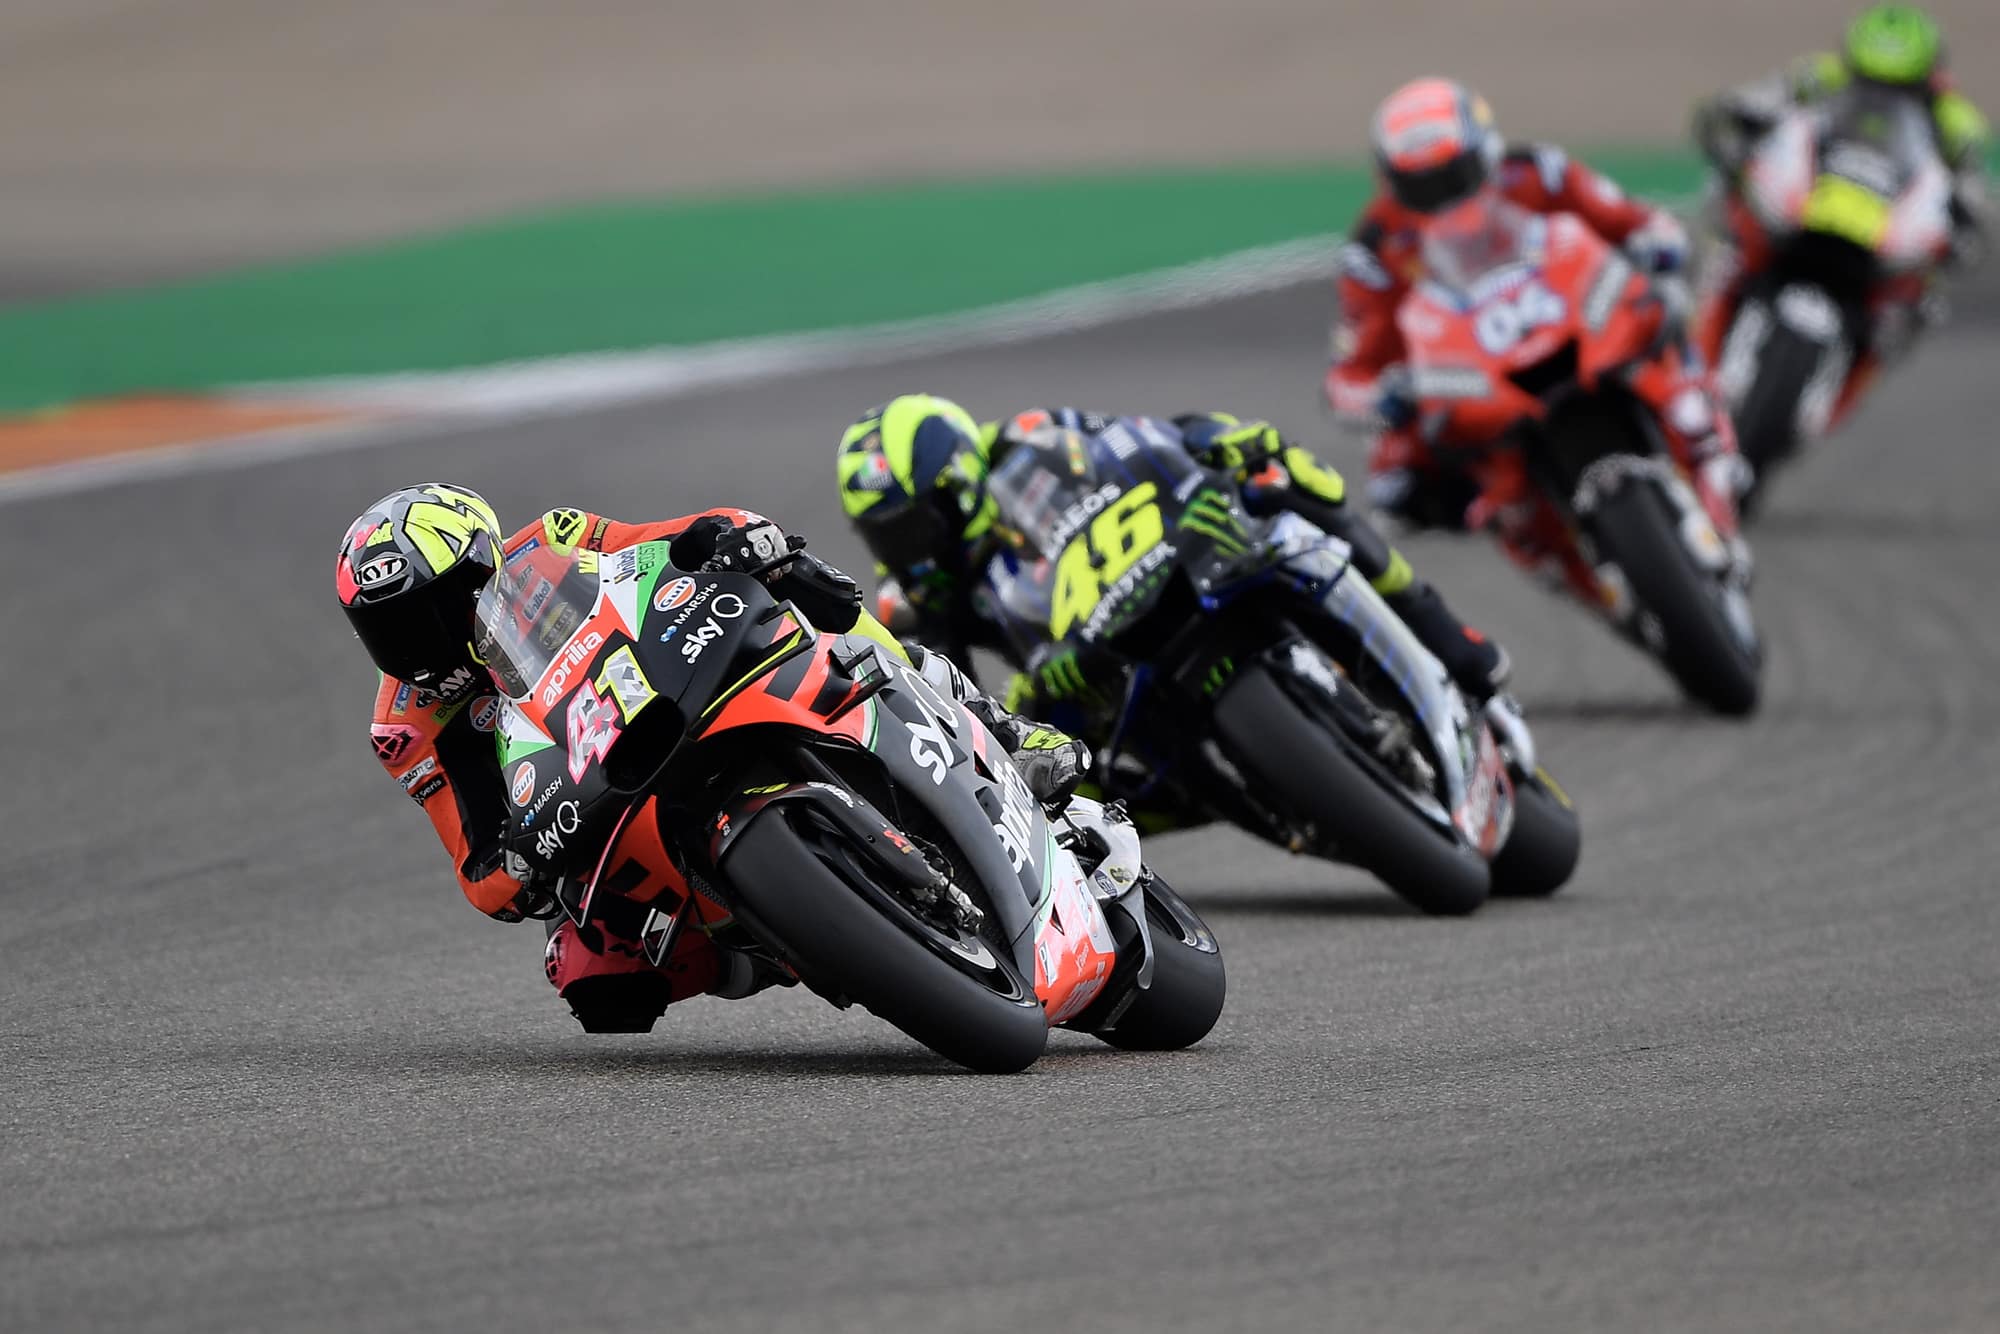 Espargaró leads Rossi, Dovizioso and Crutchlow at Aragon